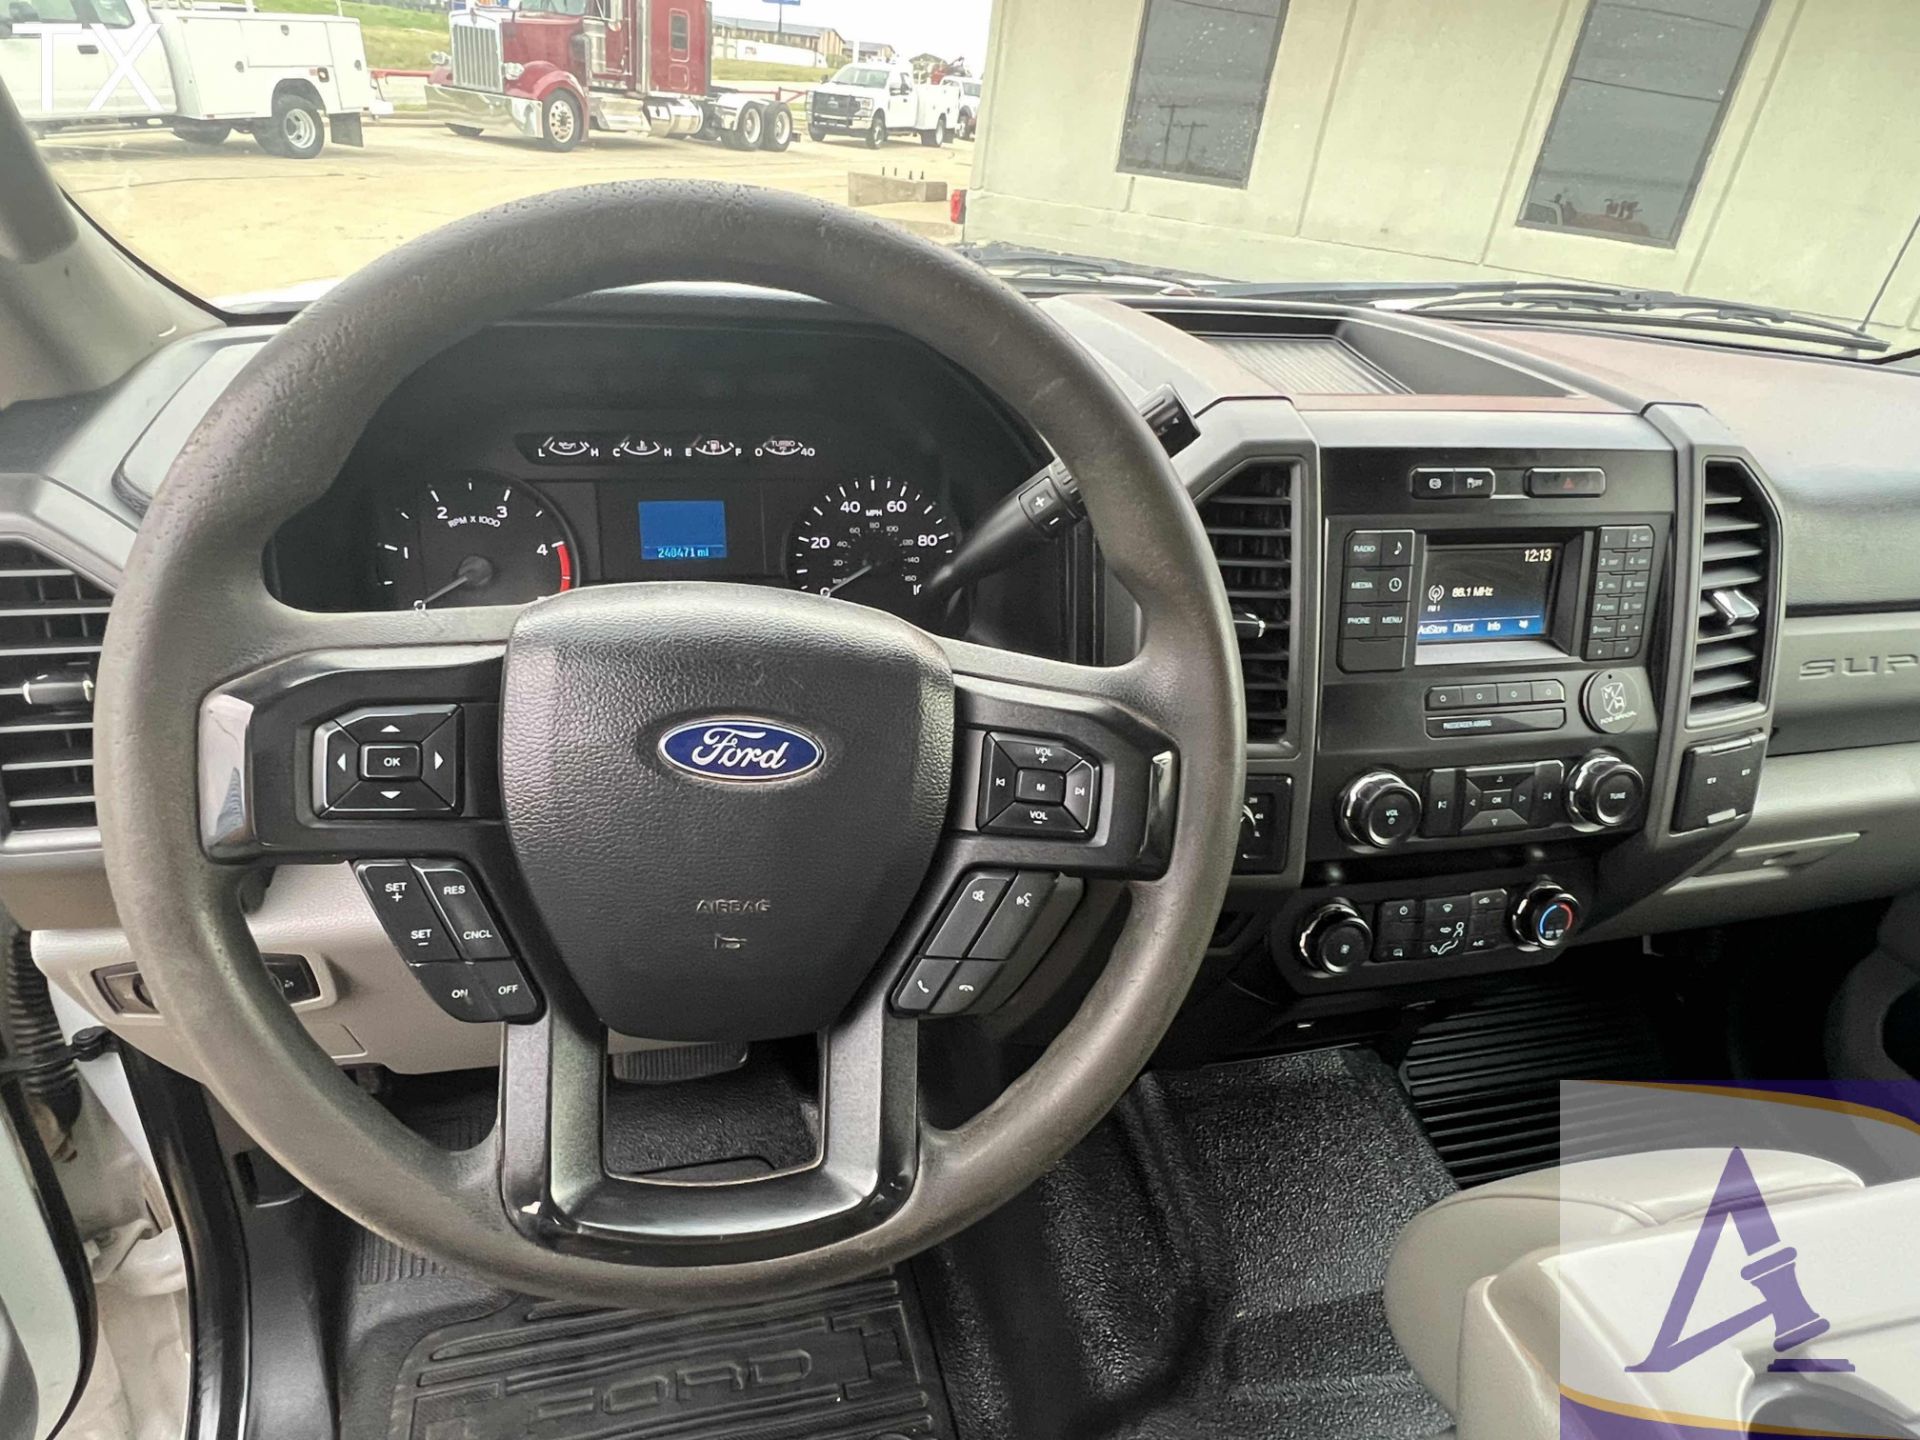 2019 Ford F550 4x4 Crew Cab Fuel Truck, Ingersoll-Rand Air Compressor, Toolboxes! - Image 14 of 20